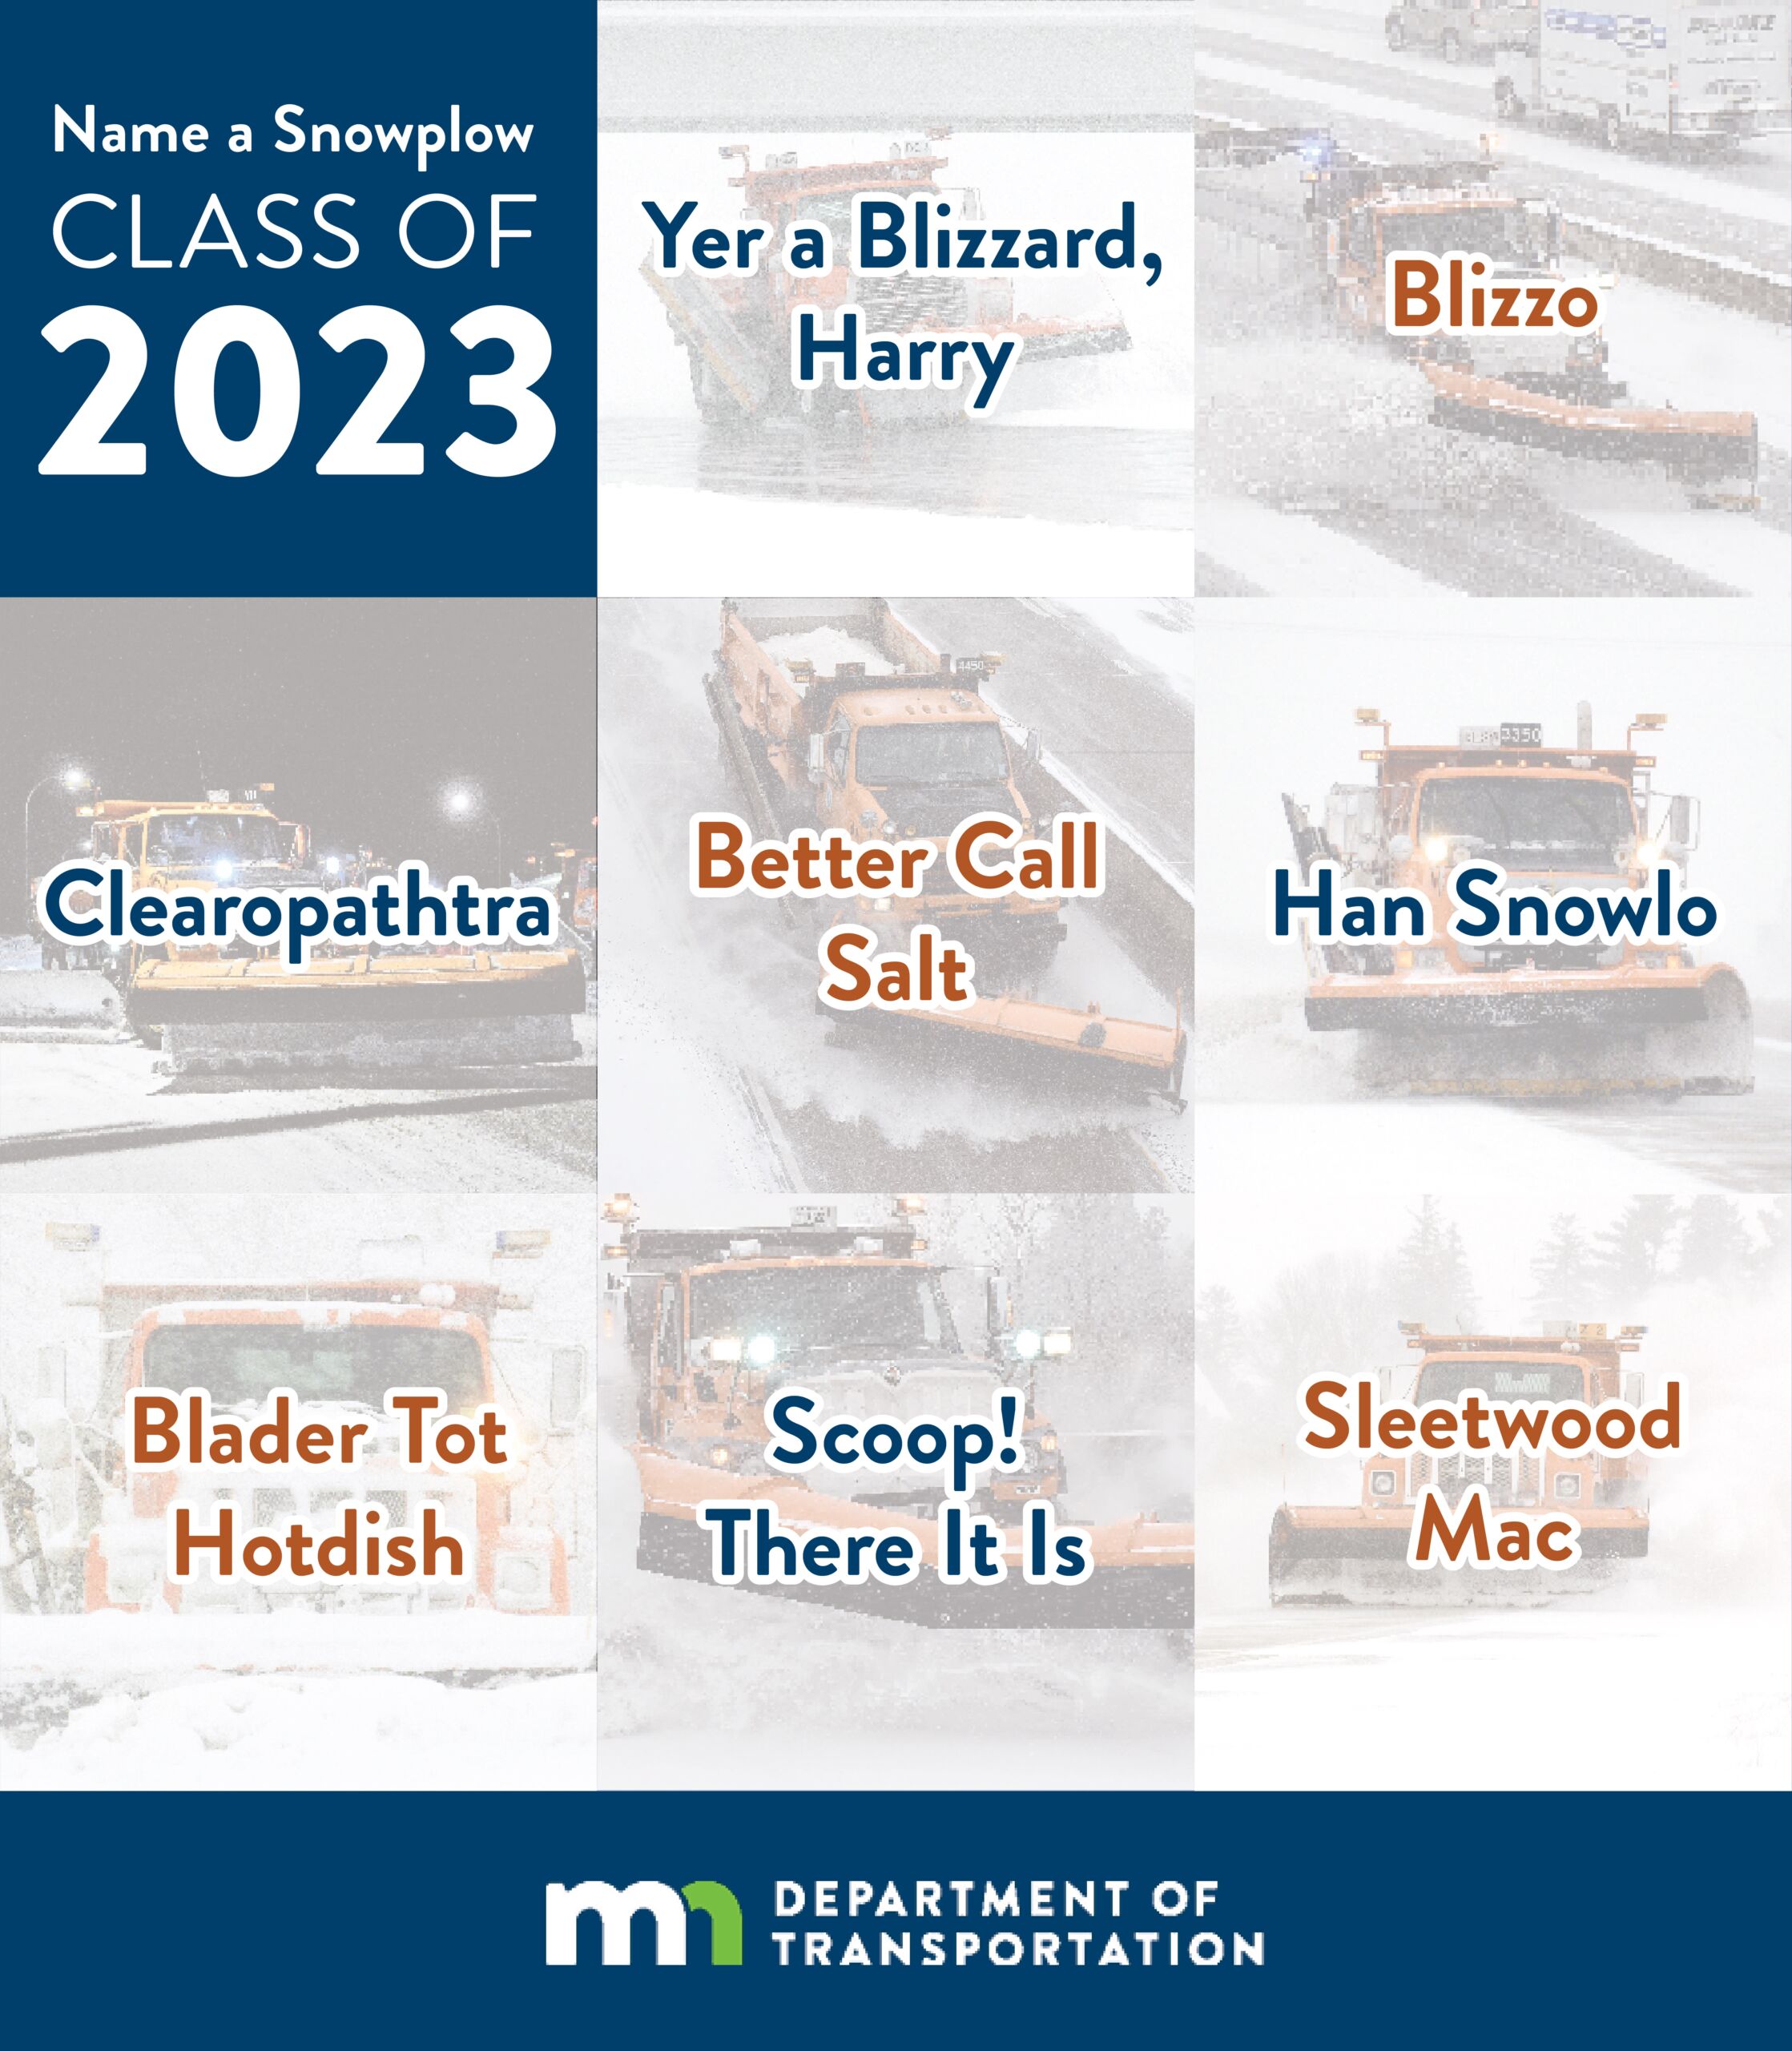 MnDOT Announces Winning Names for Name a Snowplow Contest; “Yer a